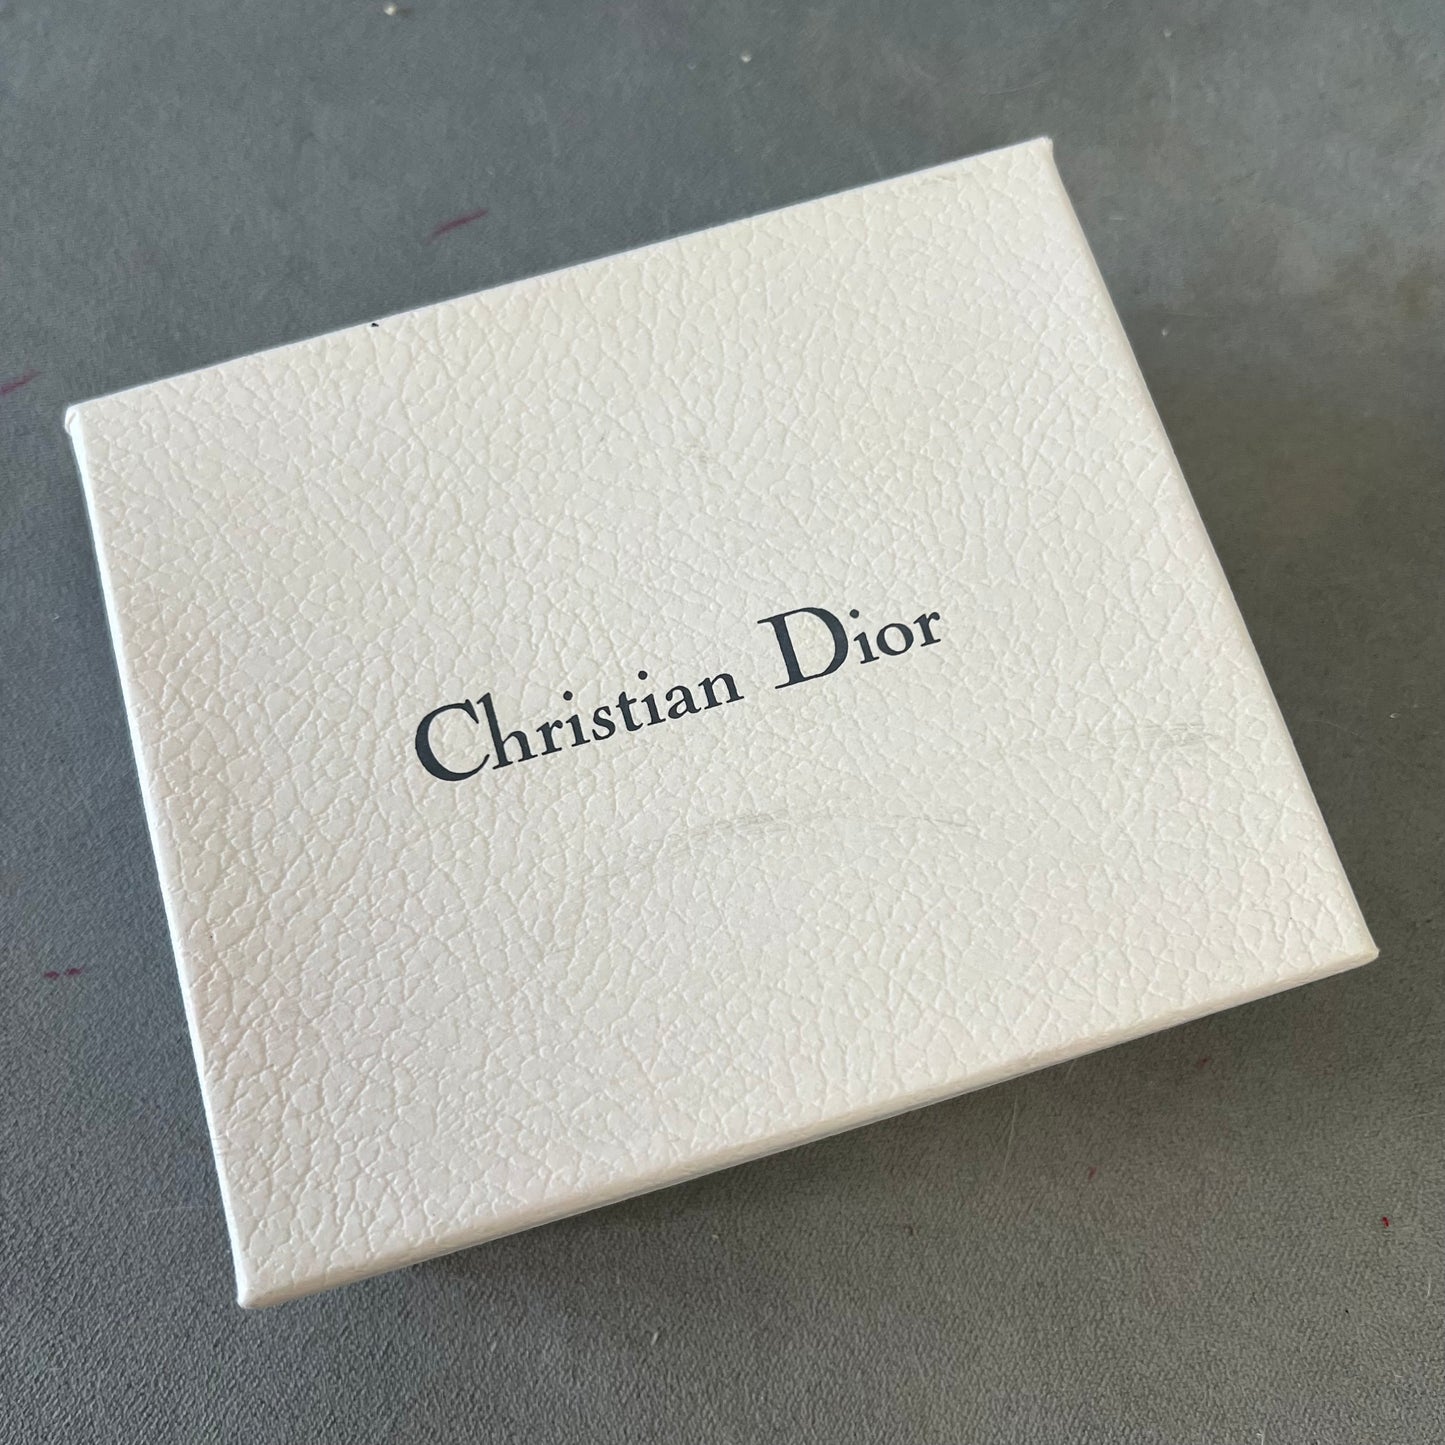 CHRISTIAN DIOR Goods Box 5.60x4.75x1.90 inches + Pouch + Tissue Paper + Filled Certificate